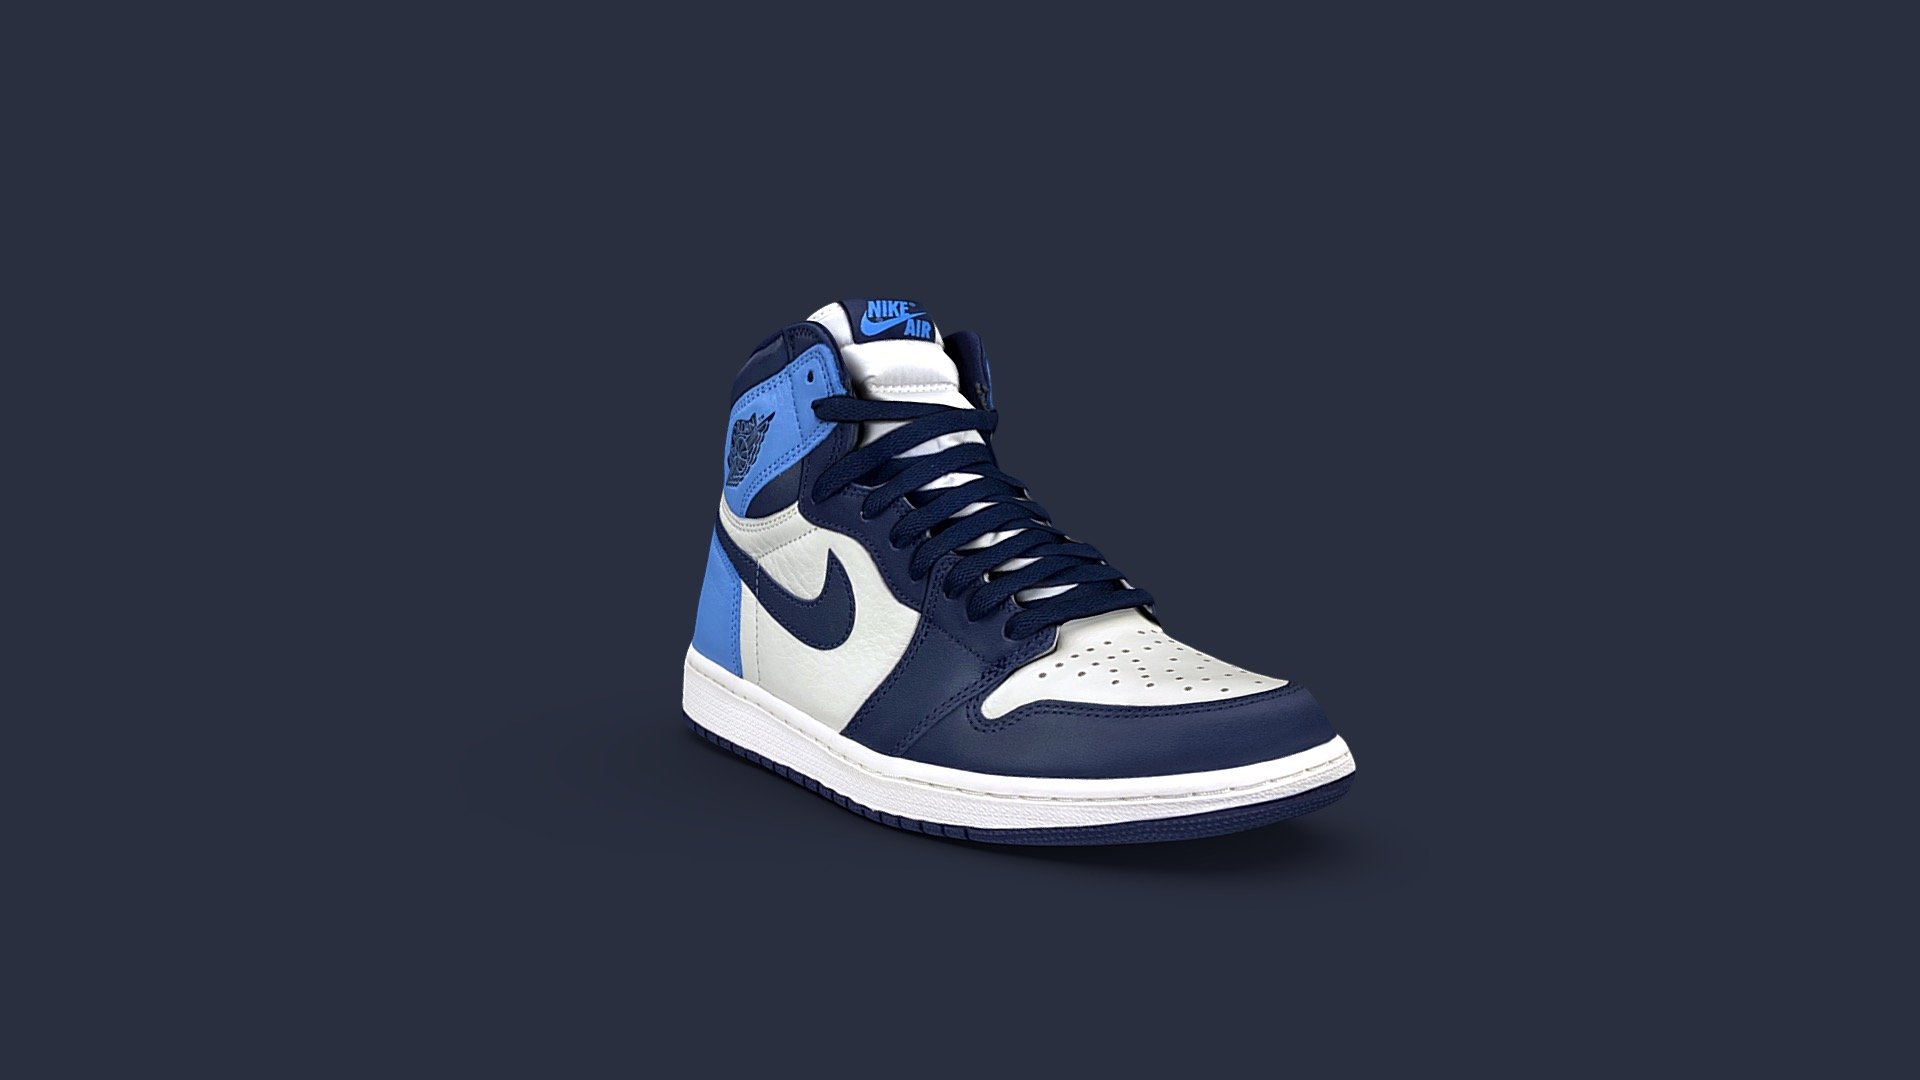 A 3D model of Air Jordan, the brand adds a new colorway to it’s hot streak of Jordan 1 releases with the Air Jordan 1 “Obsidian / University Blue”. Since its debut in 1985, the Air Jordan 1 has been a cultural monument, breaking barriers between the court and the streets. Jordan Brand has continued to shed new light on this timeless silhouette and does so with this release.

Black Ink Immersive - Air Jordan 1 Retro High Obsidian UNC - 3D model by Black Ink (@blackink) 3d model